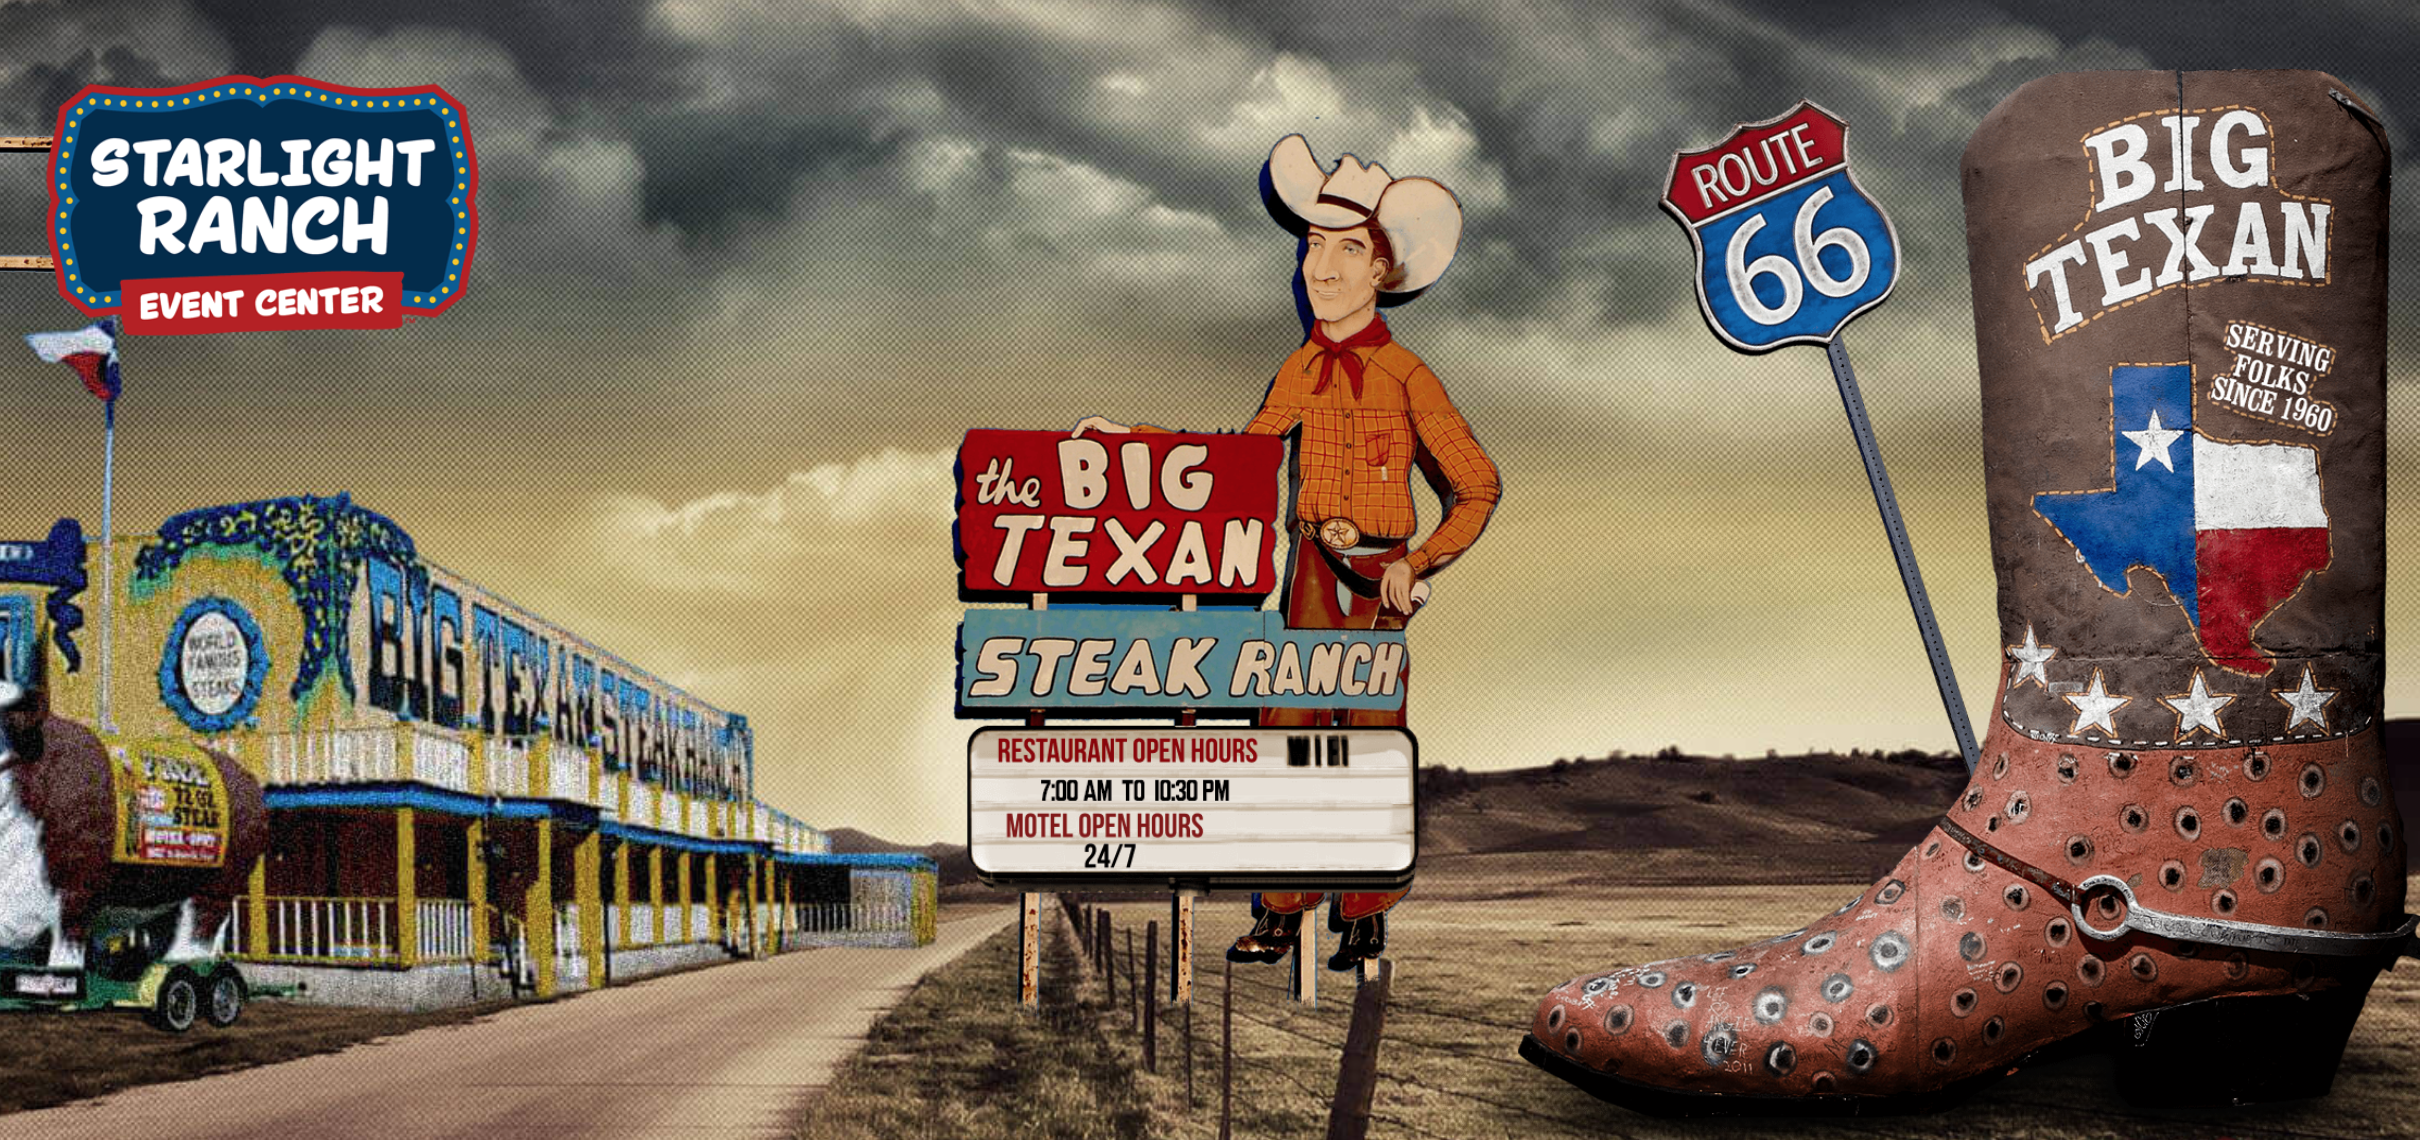 The Big Texan Steak Ranch and Brewery